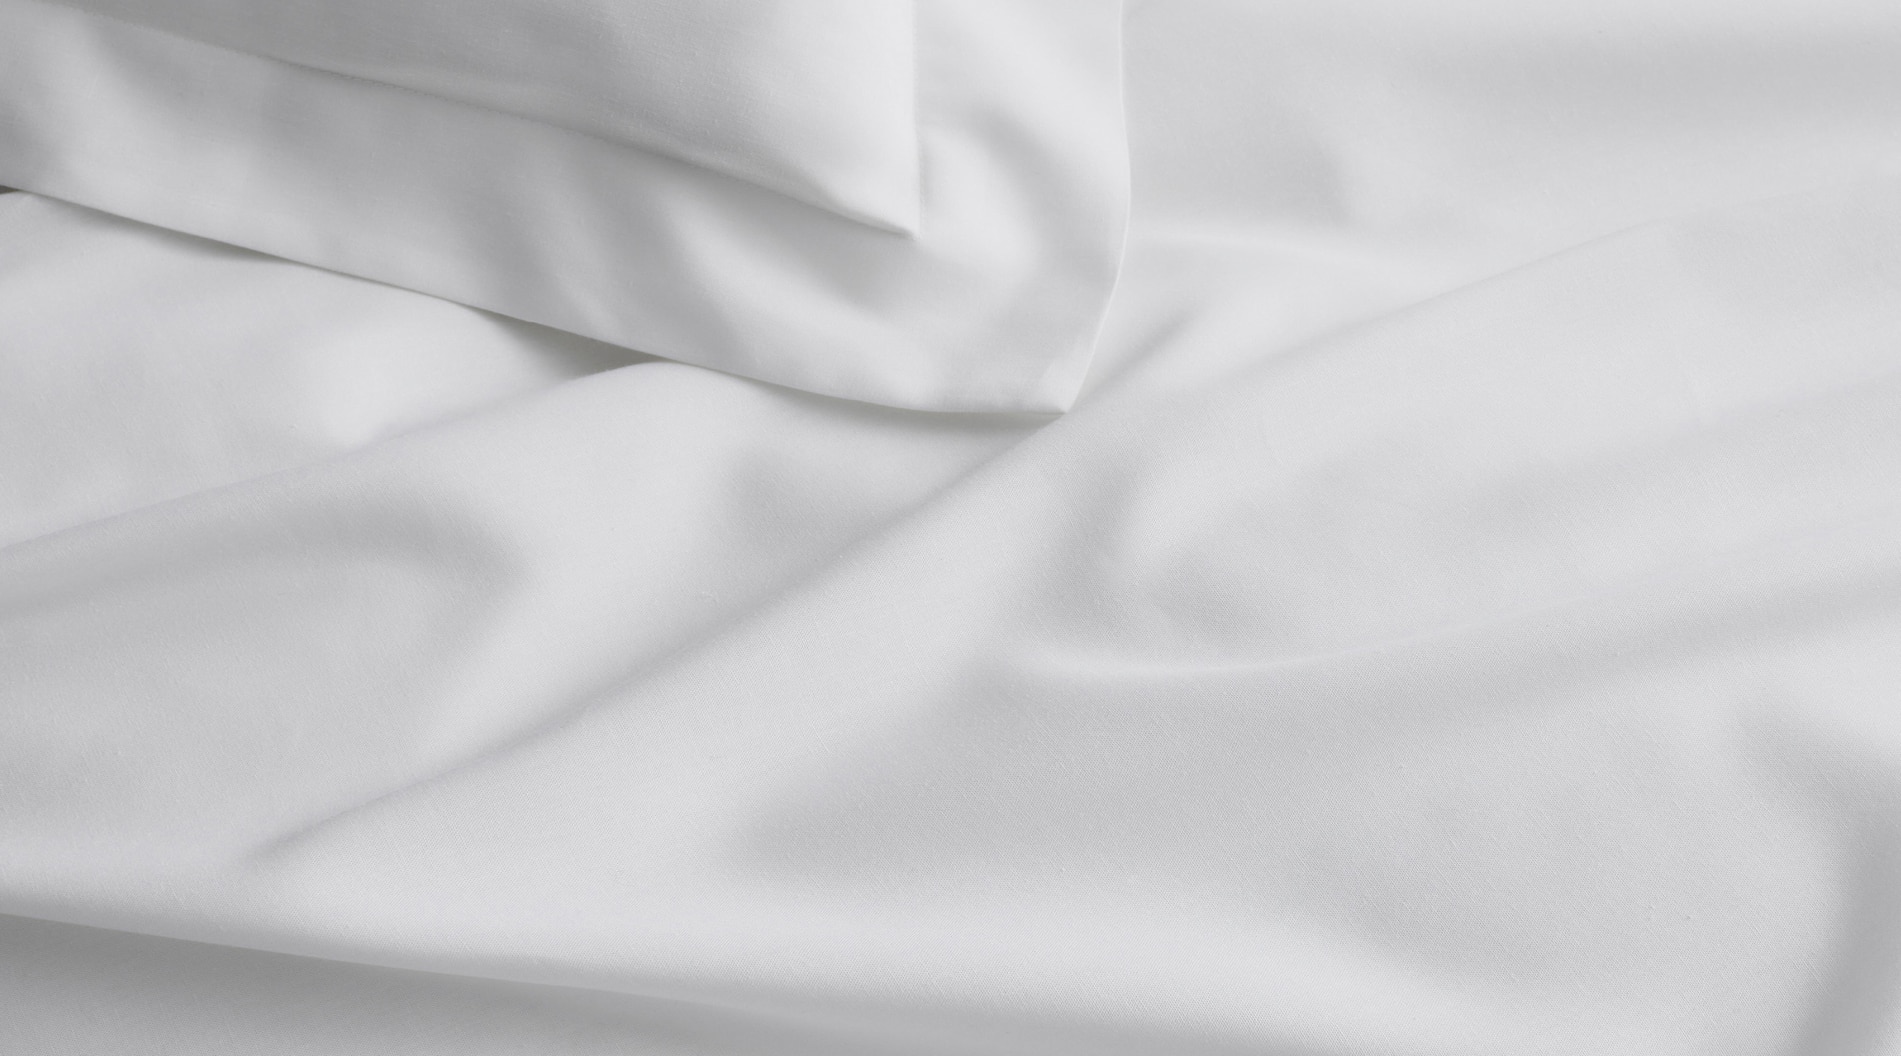 close up of belgian linen flax sheet and corner of pillow, in crisp white shade. detail shows how it drapes and crumples in a relaxed way.